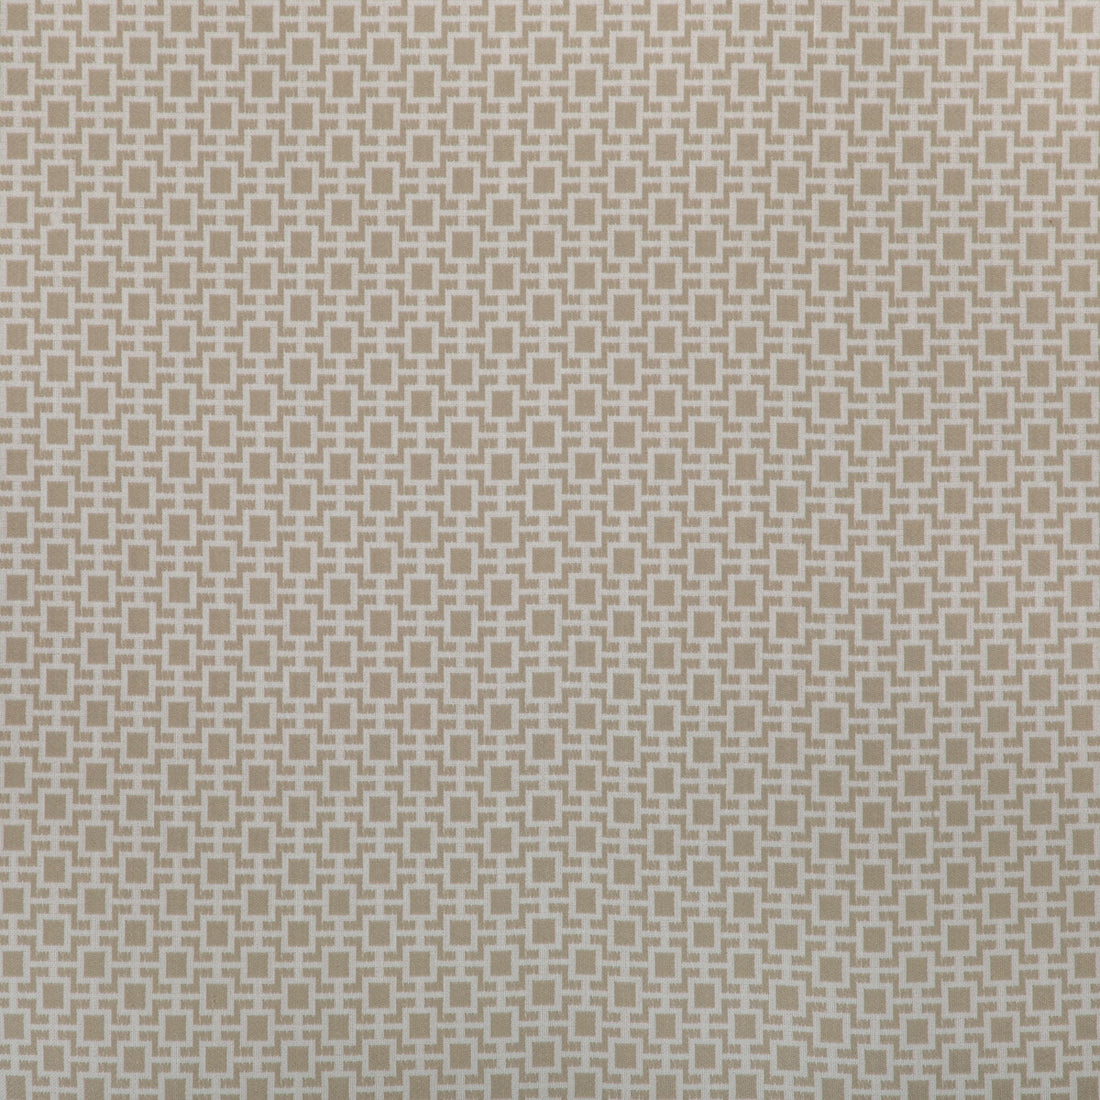 Kravet Design fabric in 36875-16 color - pattern 36875.16.0 - by Kravet Design in the Insideout Seaqual Initiative collection